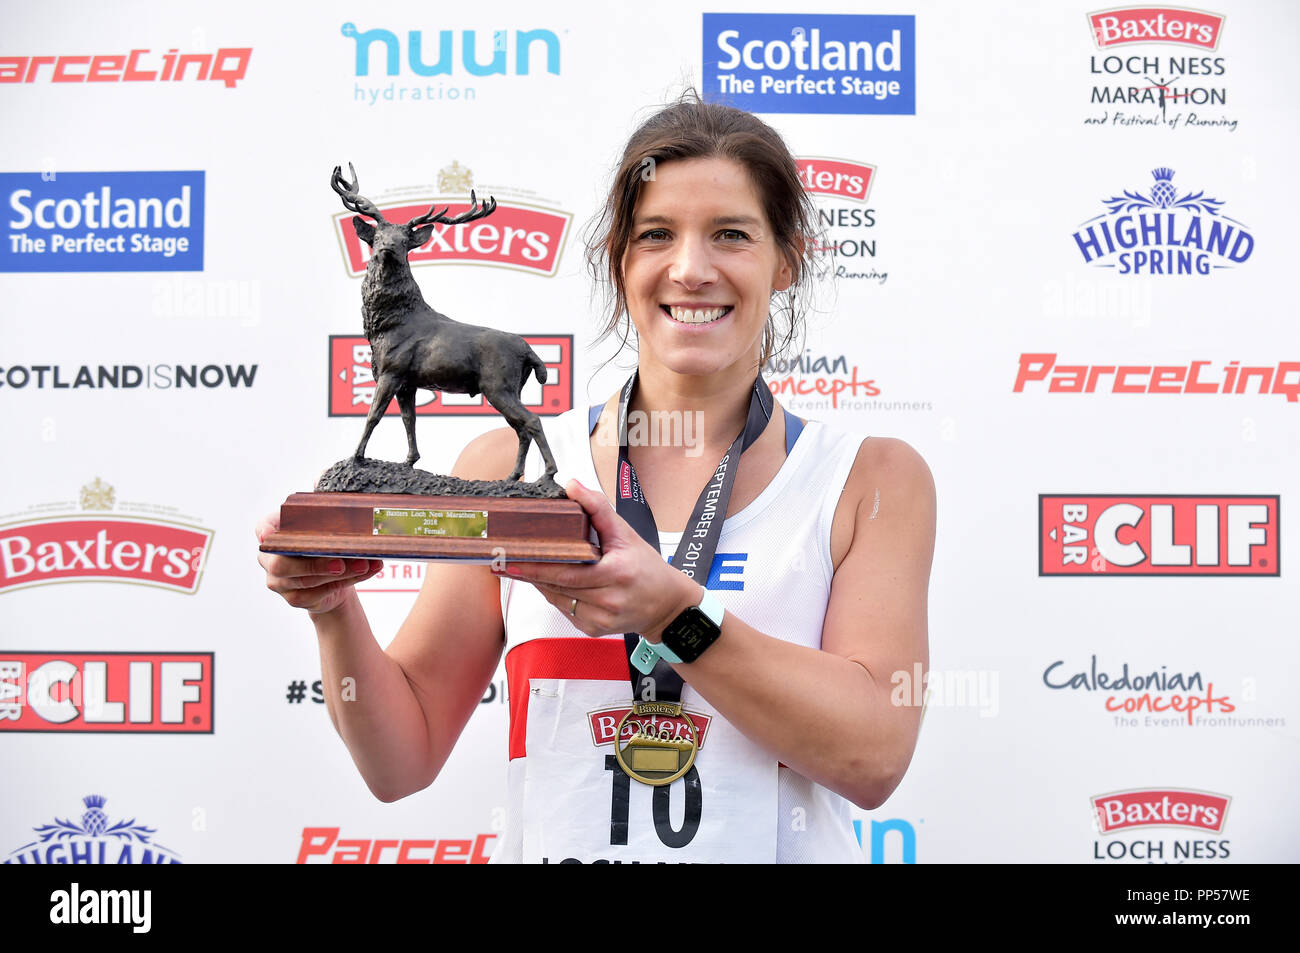 Scotland, UK. 23rd Sept 2018. 2018 Baxters Loch Ness Marathon PICTURED  womans winner Sheena Logan from Fife (02.51.11) Credit: sandy young/Alamy Live News Stock Photo